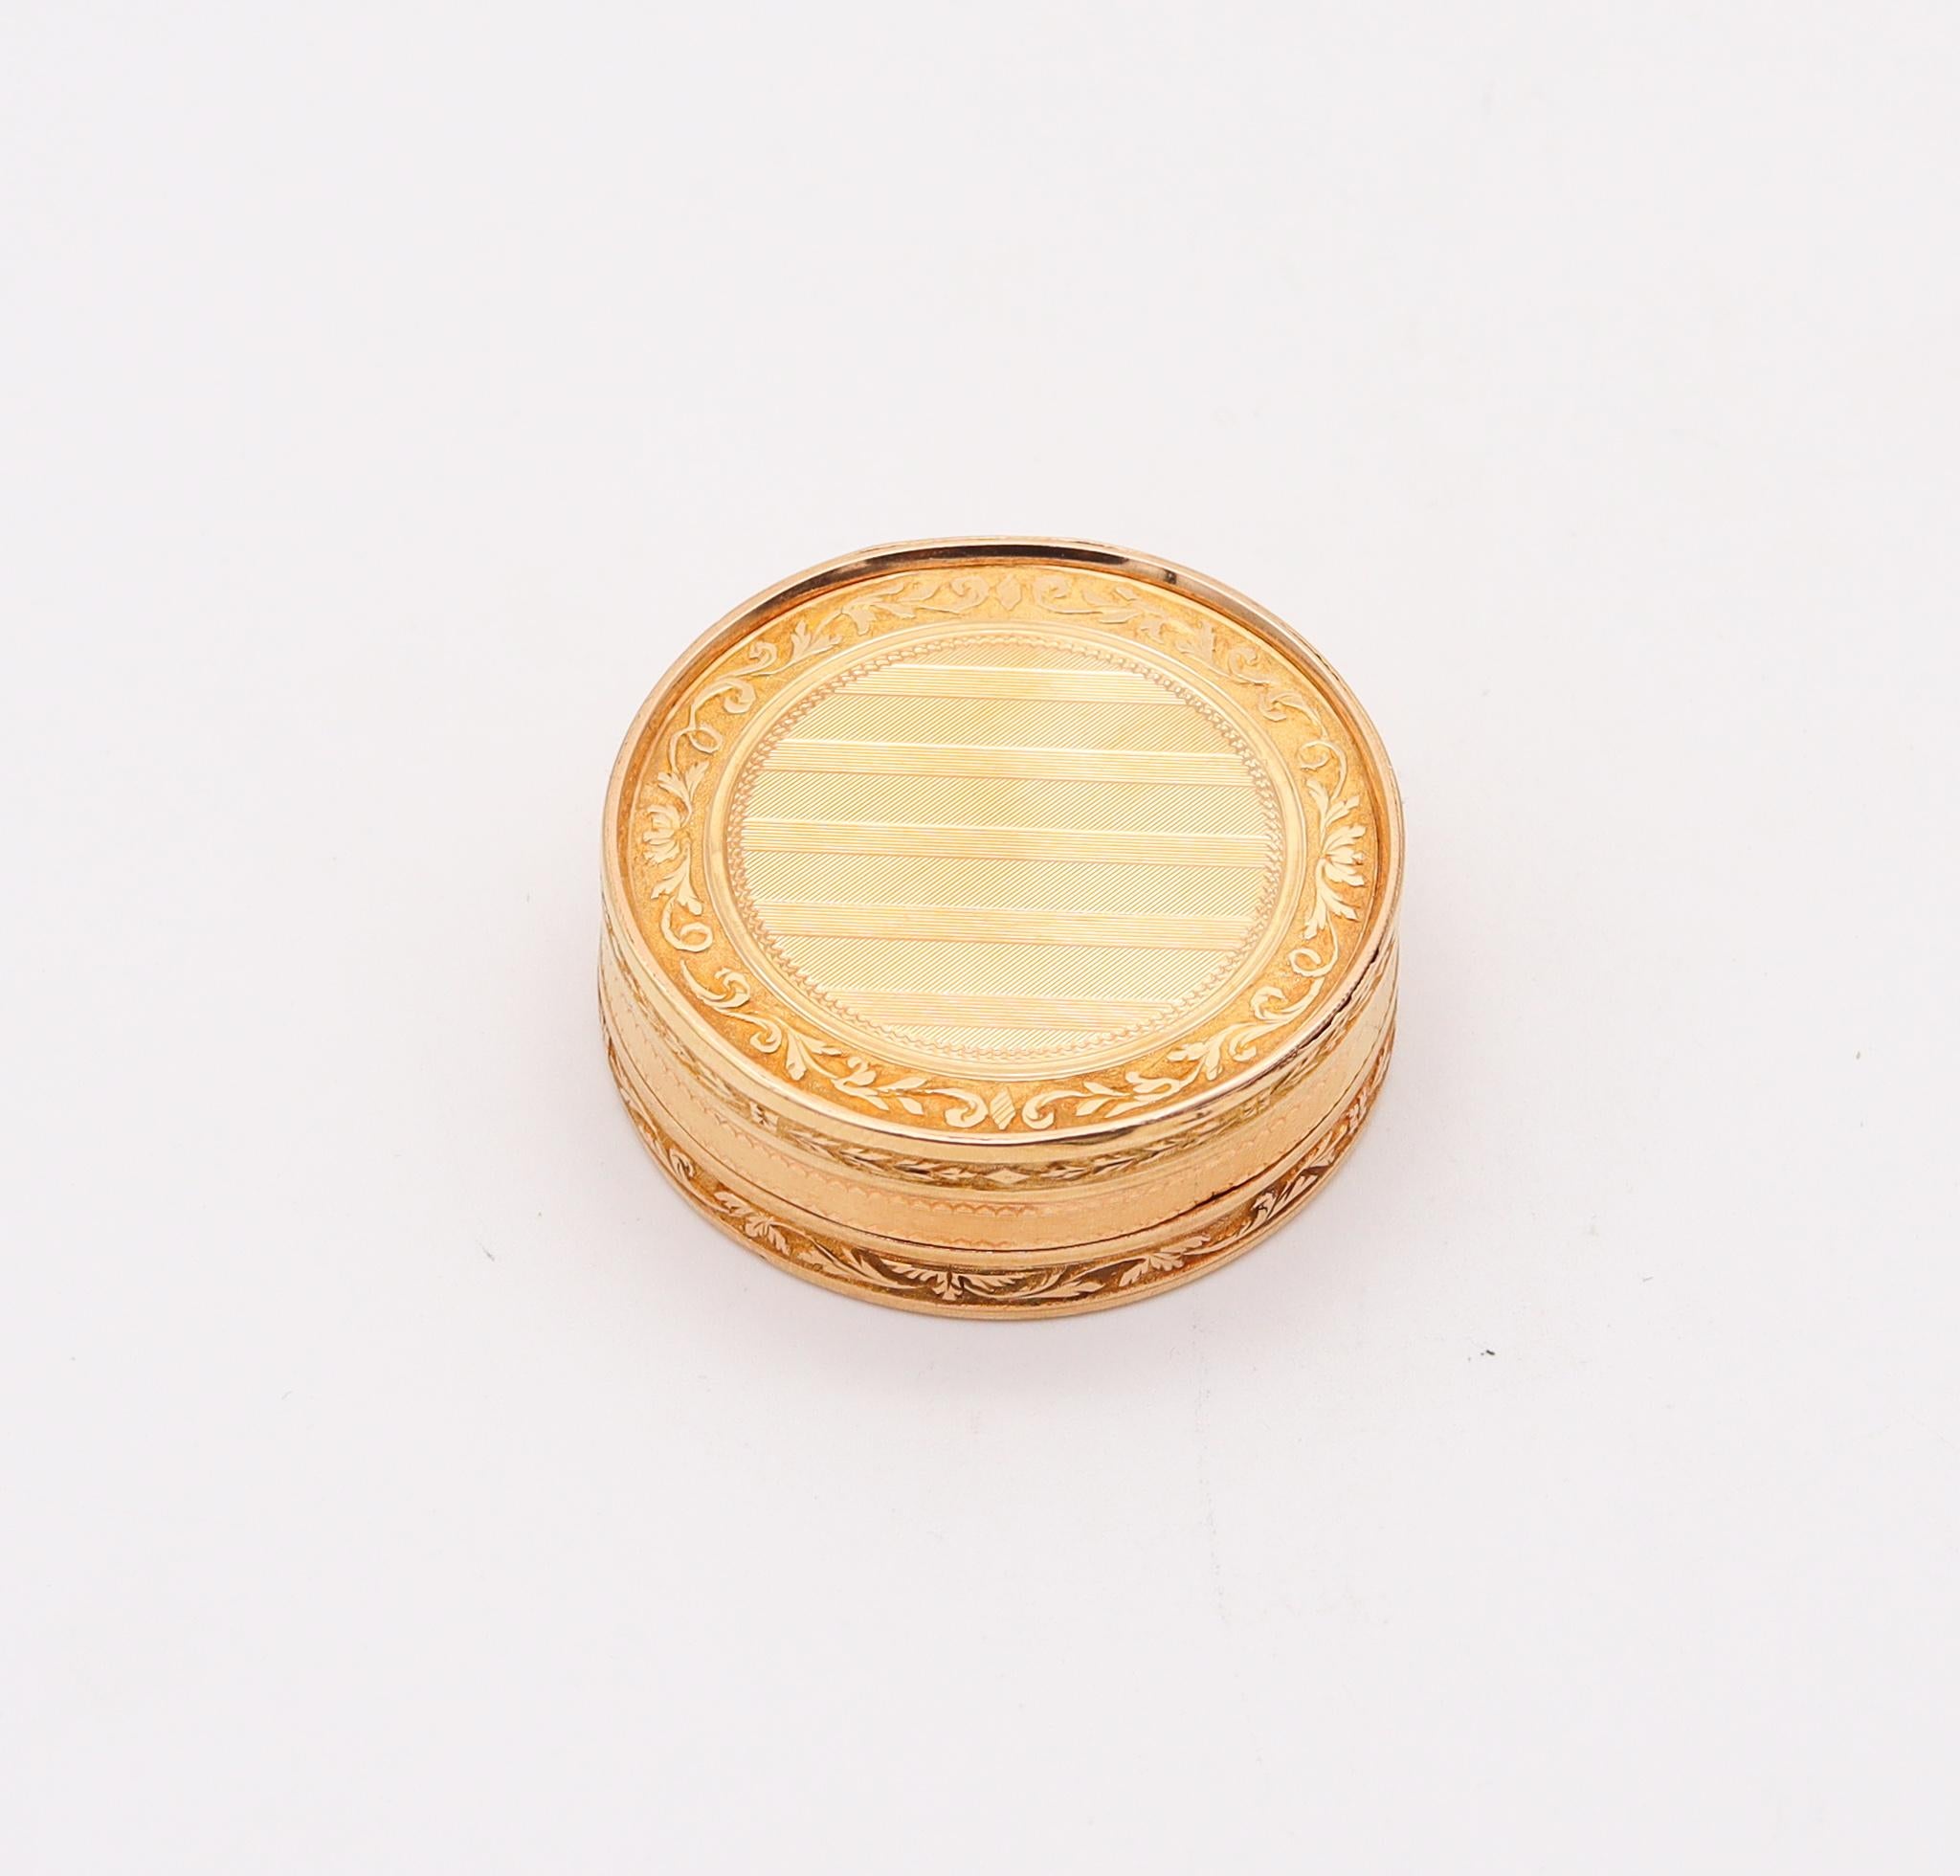 French snuff round box in gold.

Beautiful round snuff box, crafted in Paris France during the transition of the first Republic and the first empire periods, between the 1798 and 1808. This round snuff box was carefully crafted in the neoclassical